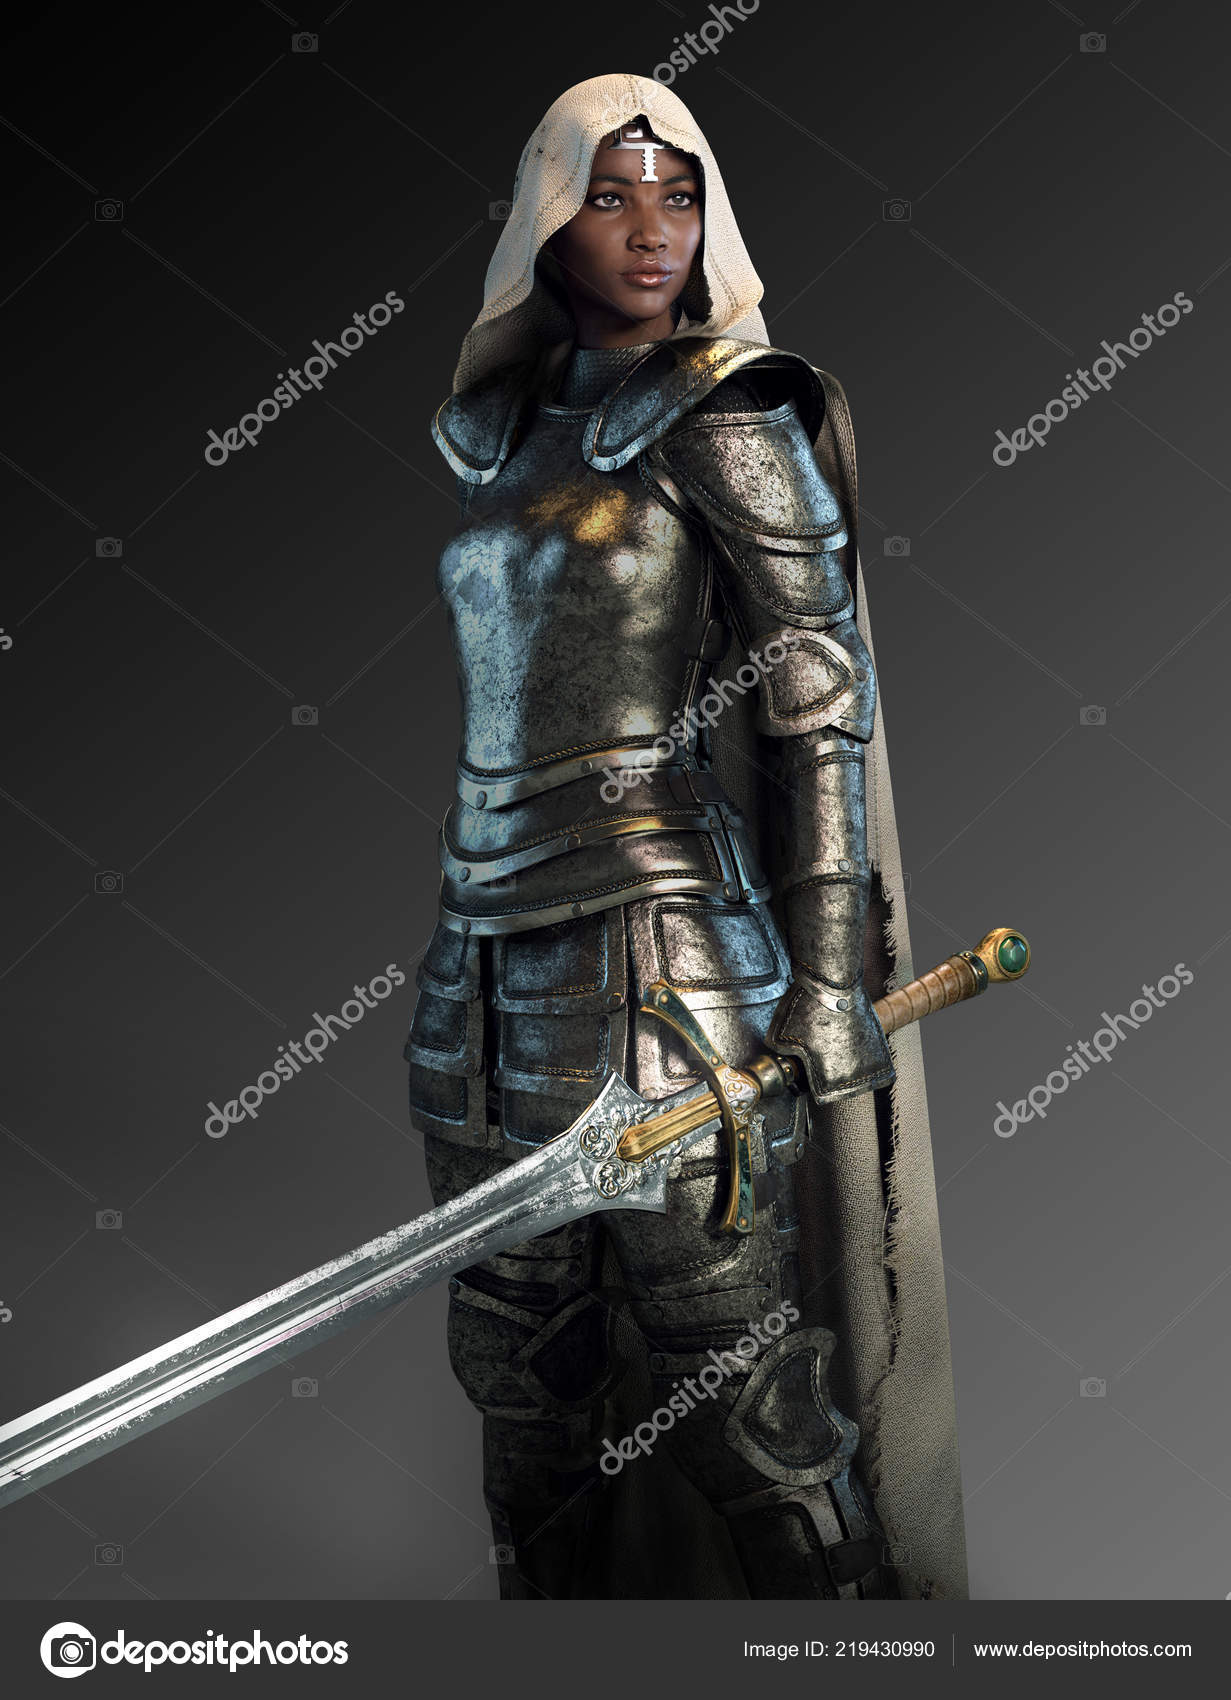 Featured image of post Female Futuristic Knight Armor Female armor or armor for women in fiction is often over the top often more for aesthetics and sexuality than protection